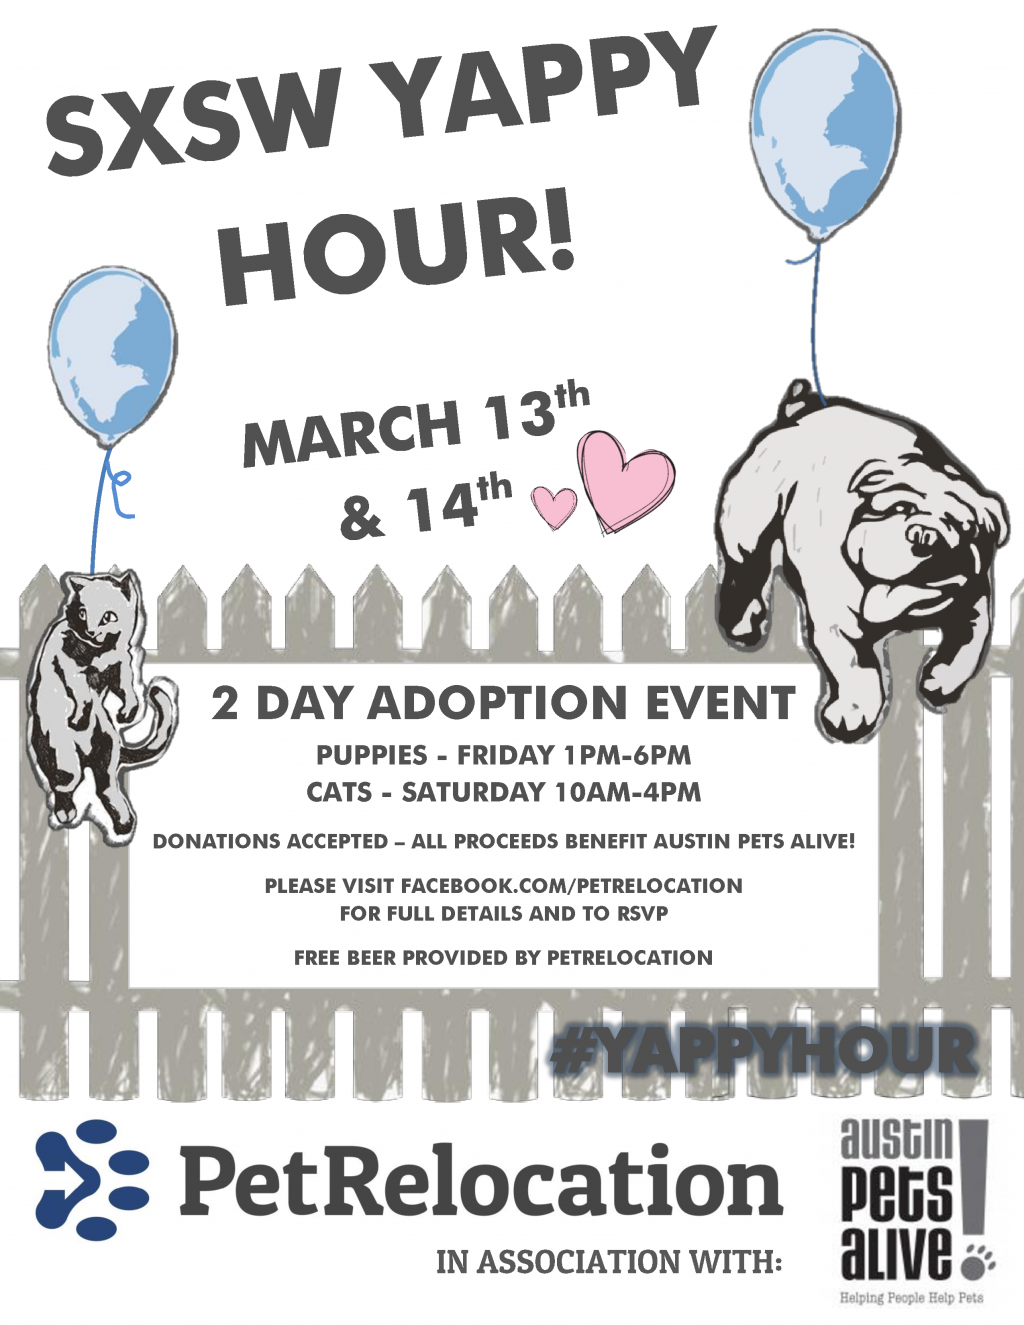 yappy hour flyer